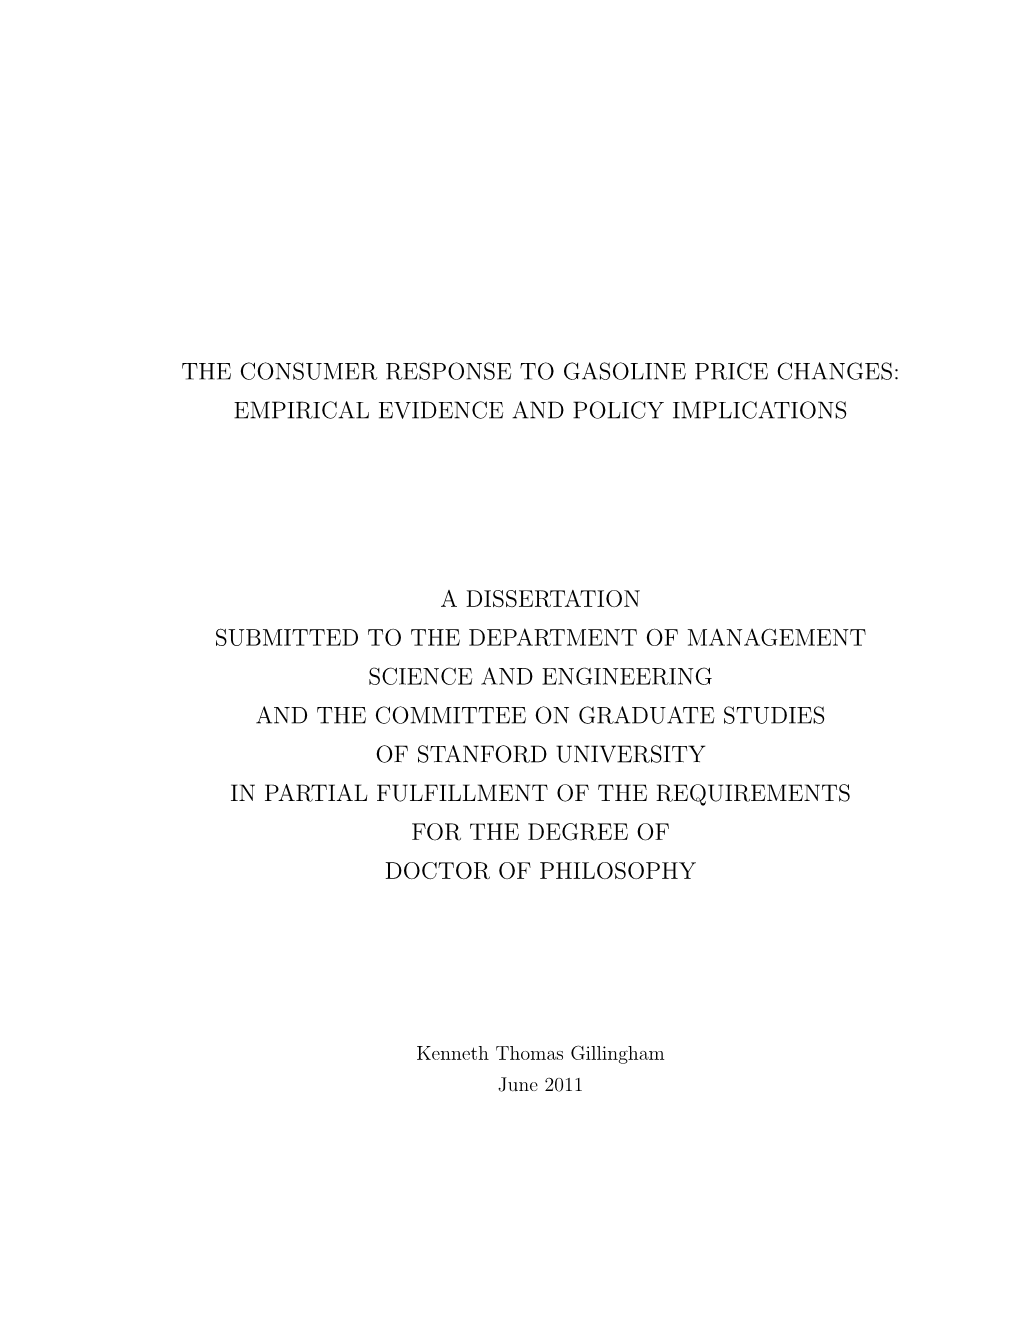 The Consumer Response to Gasoline Price Changes: Empirical Evidence and Policy Implications a Dissertation Submitted to the Depa